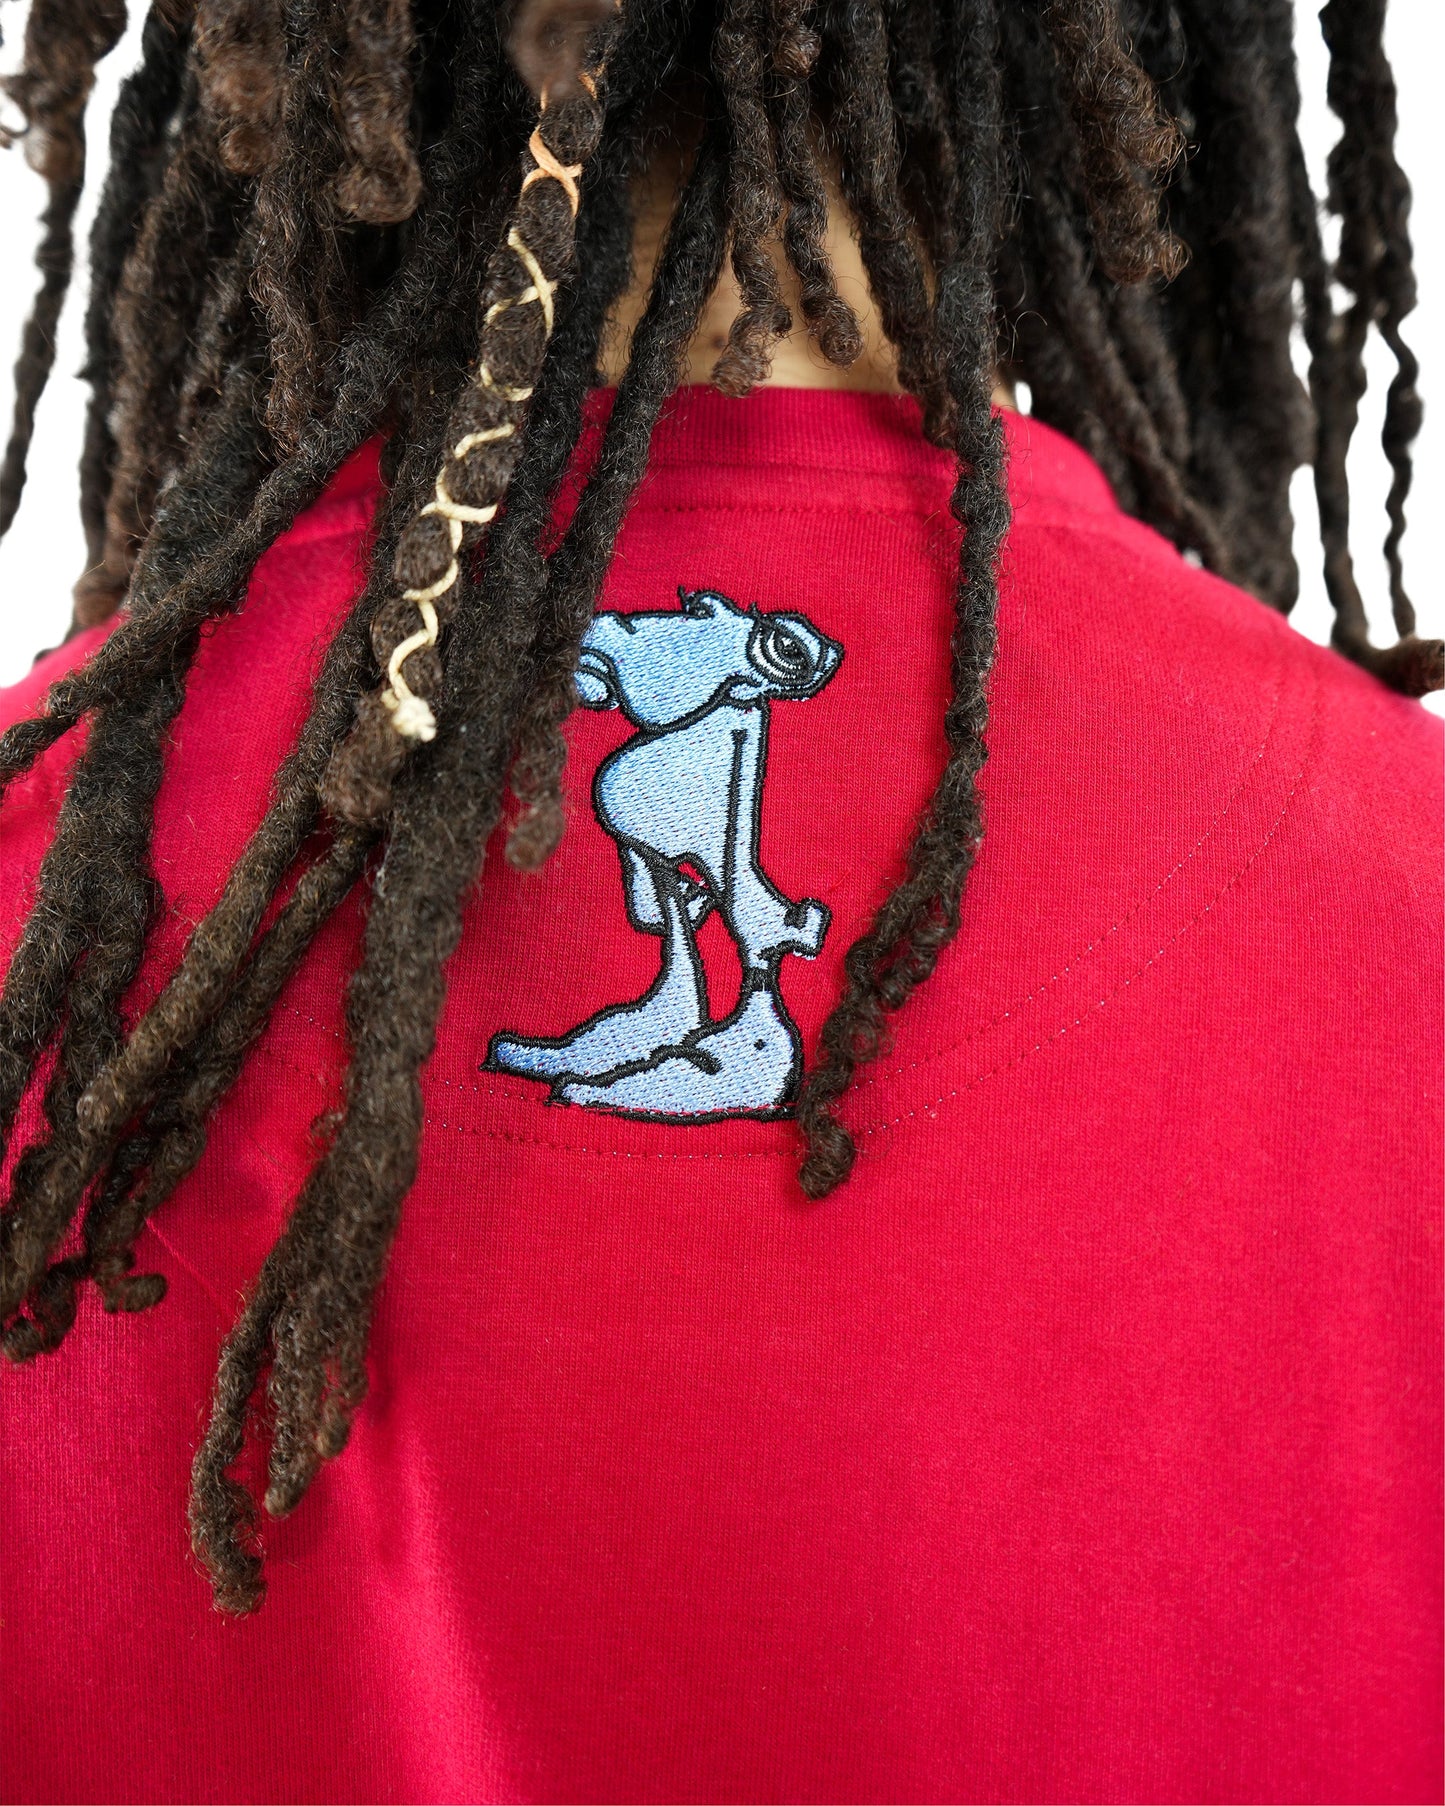 Mark Bodē Frosted Eighths Red T-Shirt